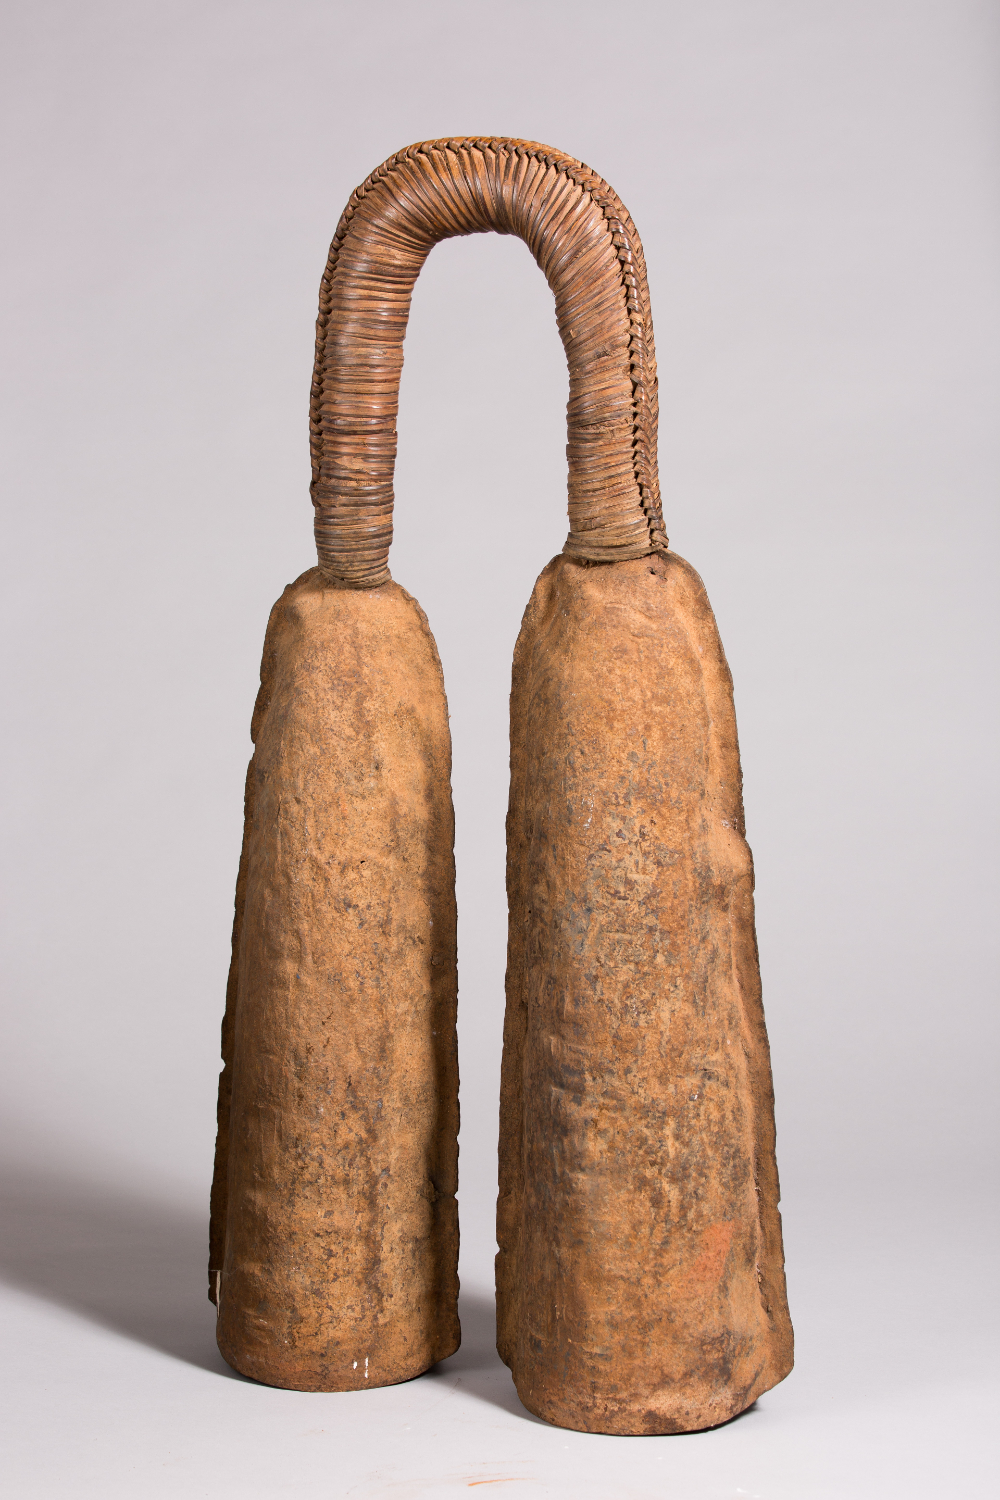 thumbnail of Double Gong from Kwifoyn Society Western Grassfields: Bamileke. medium: Iron, cane. date: early 20th century